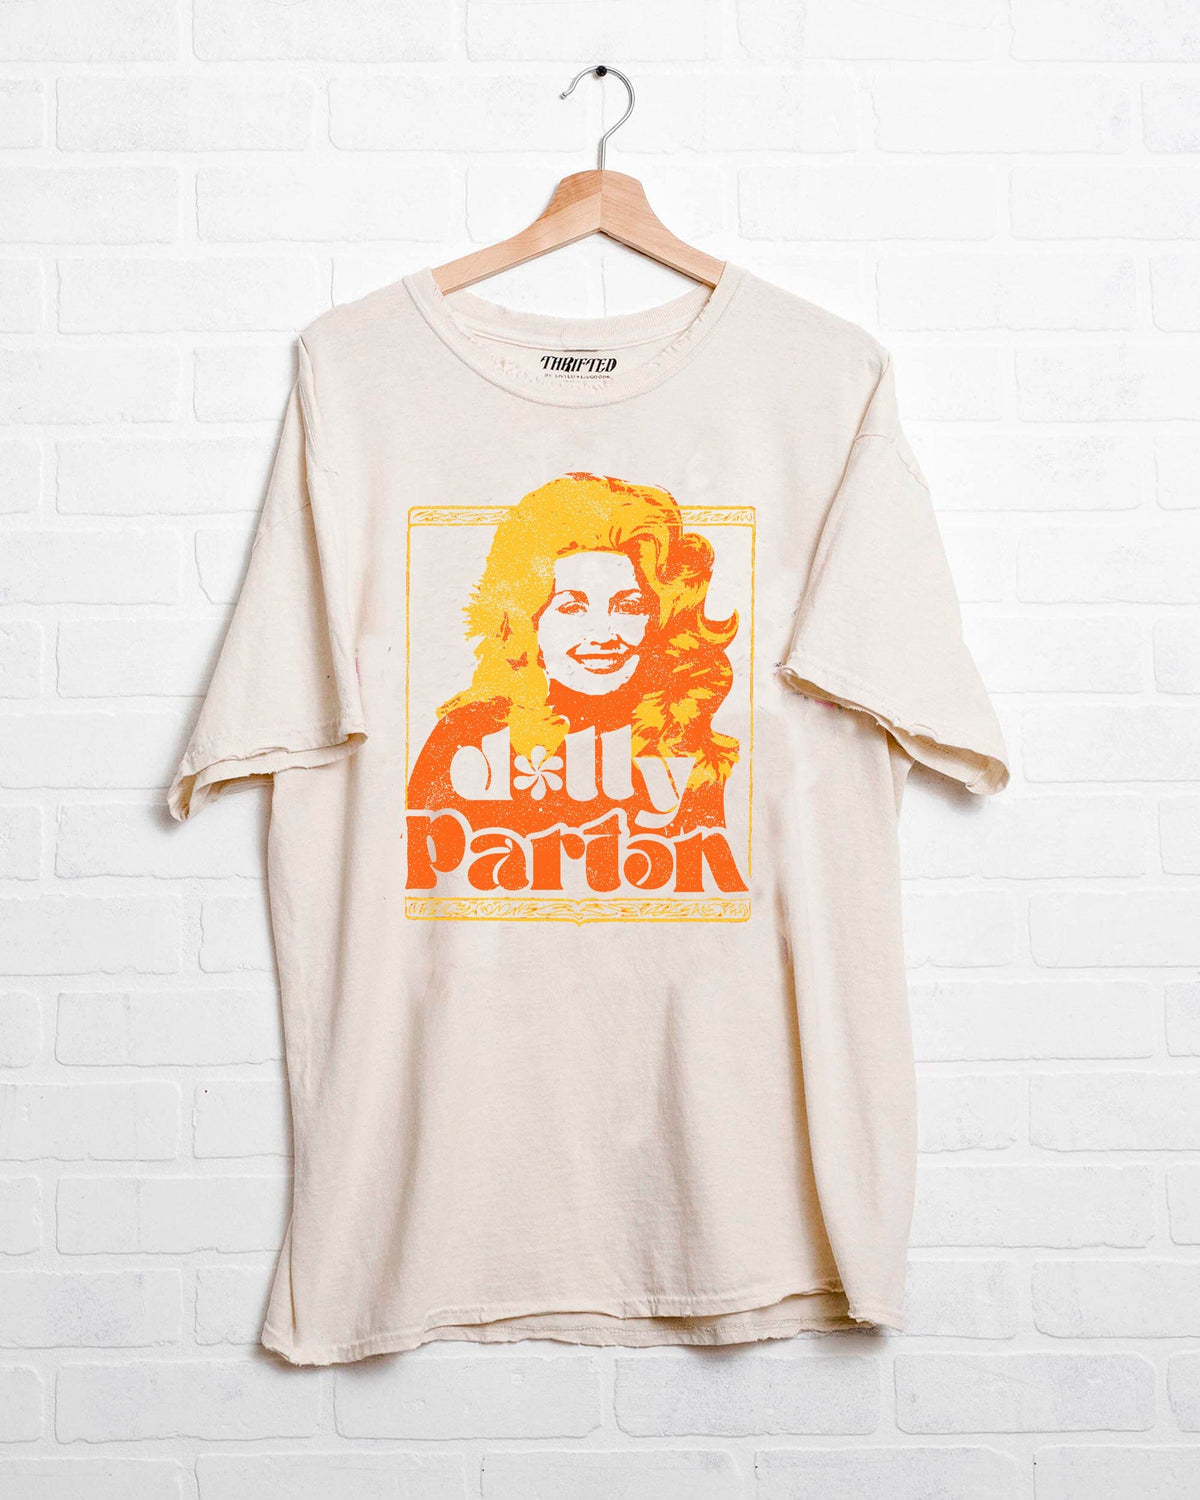 Dolly Parton Golden off-white thrifted tee